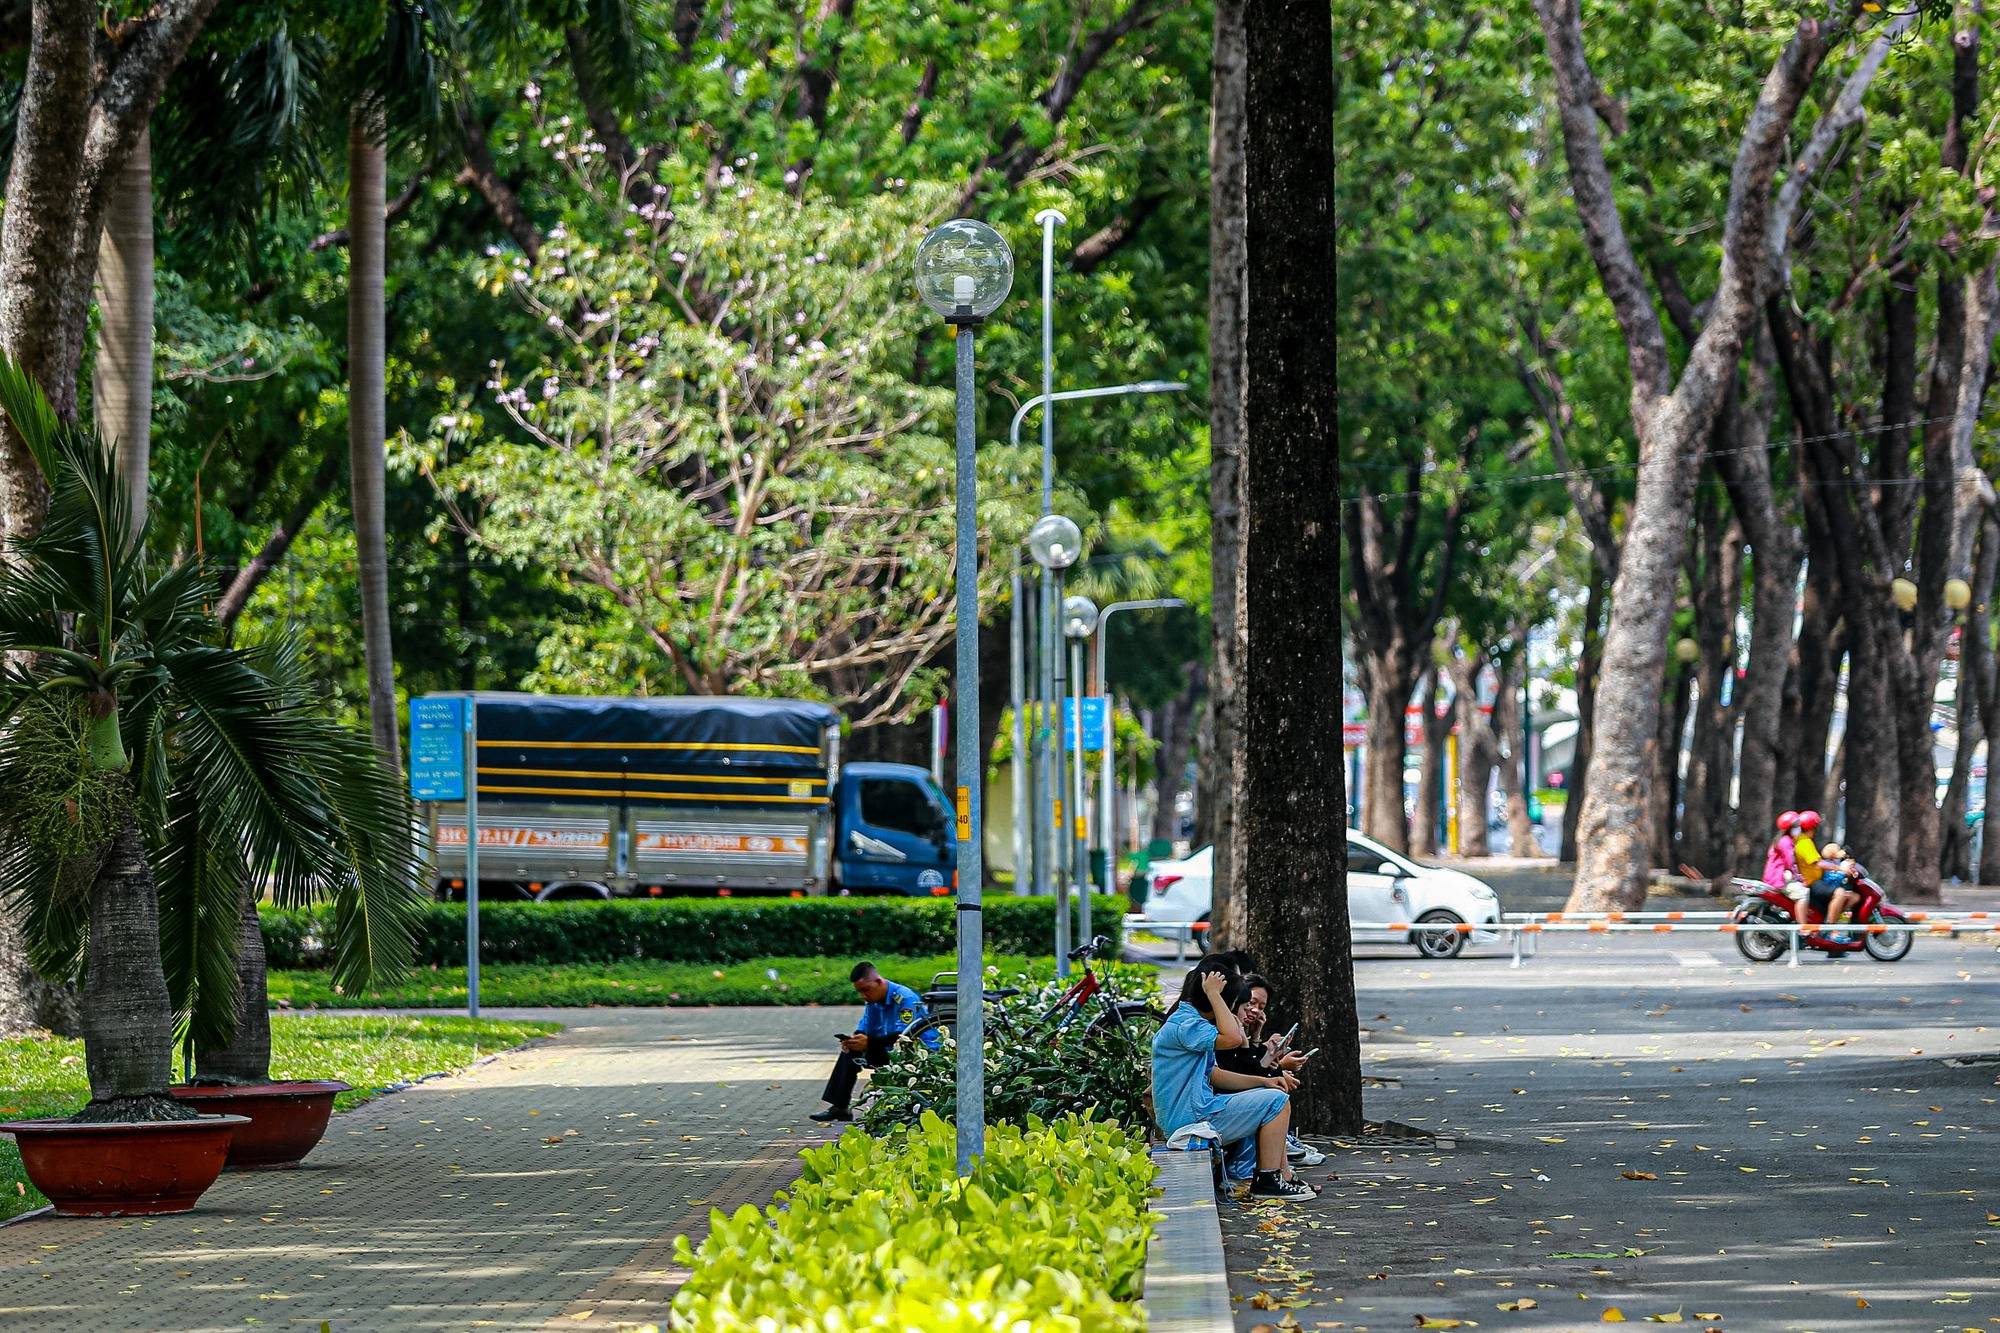 Another shady park that people looking for a way to escape the heat wave should not miss out on is the Gia Dinh Park in Go Vap District. Also dubbed “the green lung” of the southern city, the park offers huge green spaces and remains among the top destinations for those who find shady spots for relaxing and taking part in sports activities. Photo: Phuong Quyen / Tuoi Tre